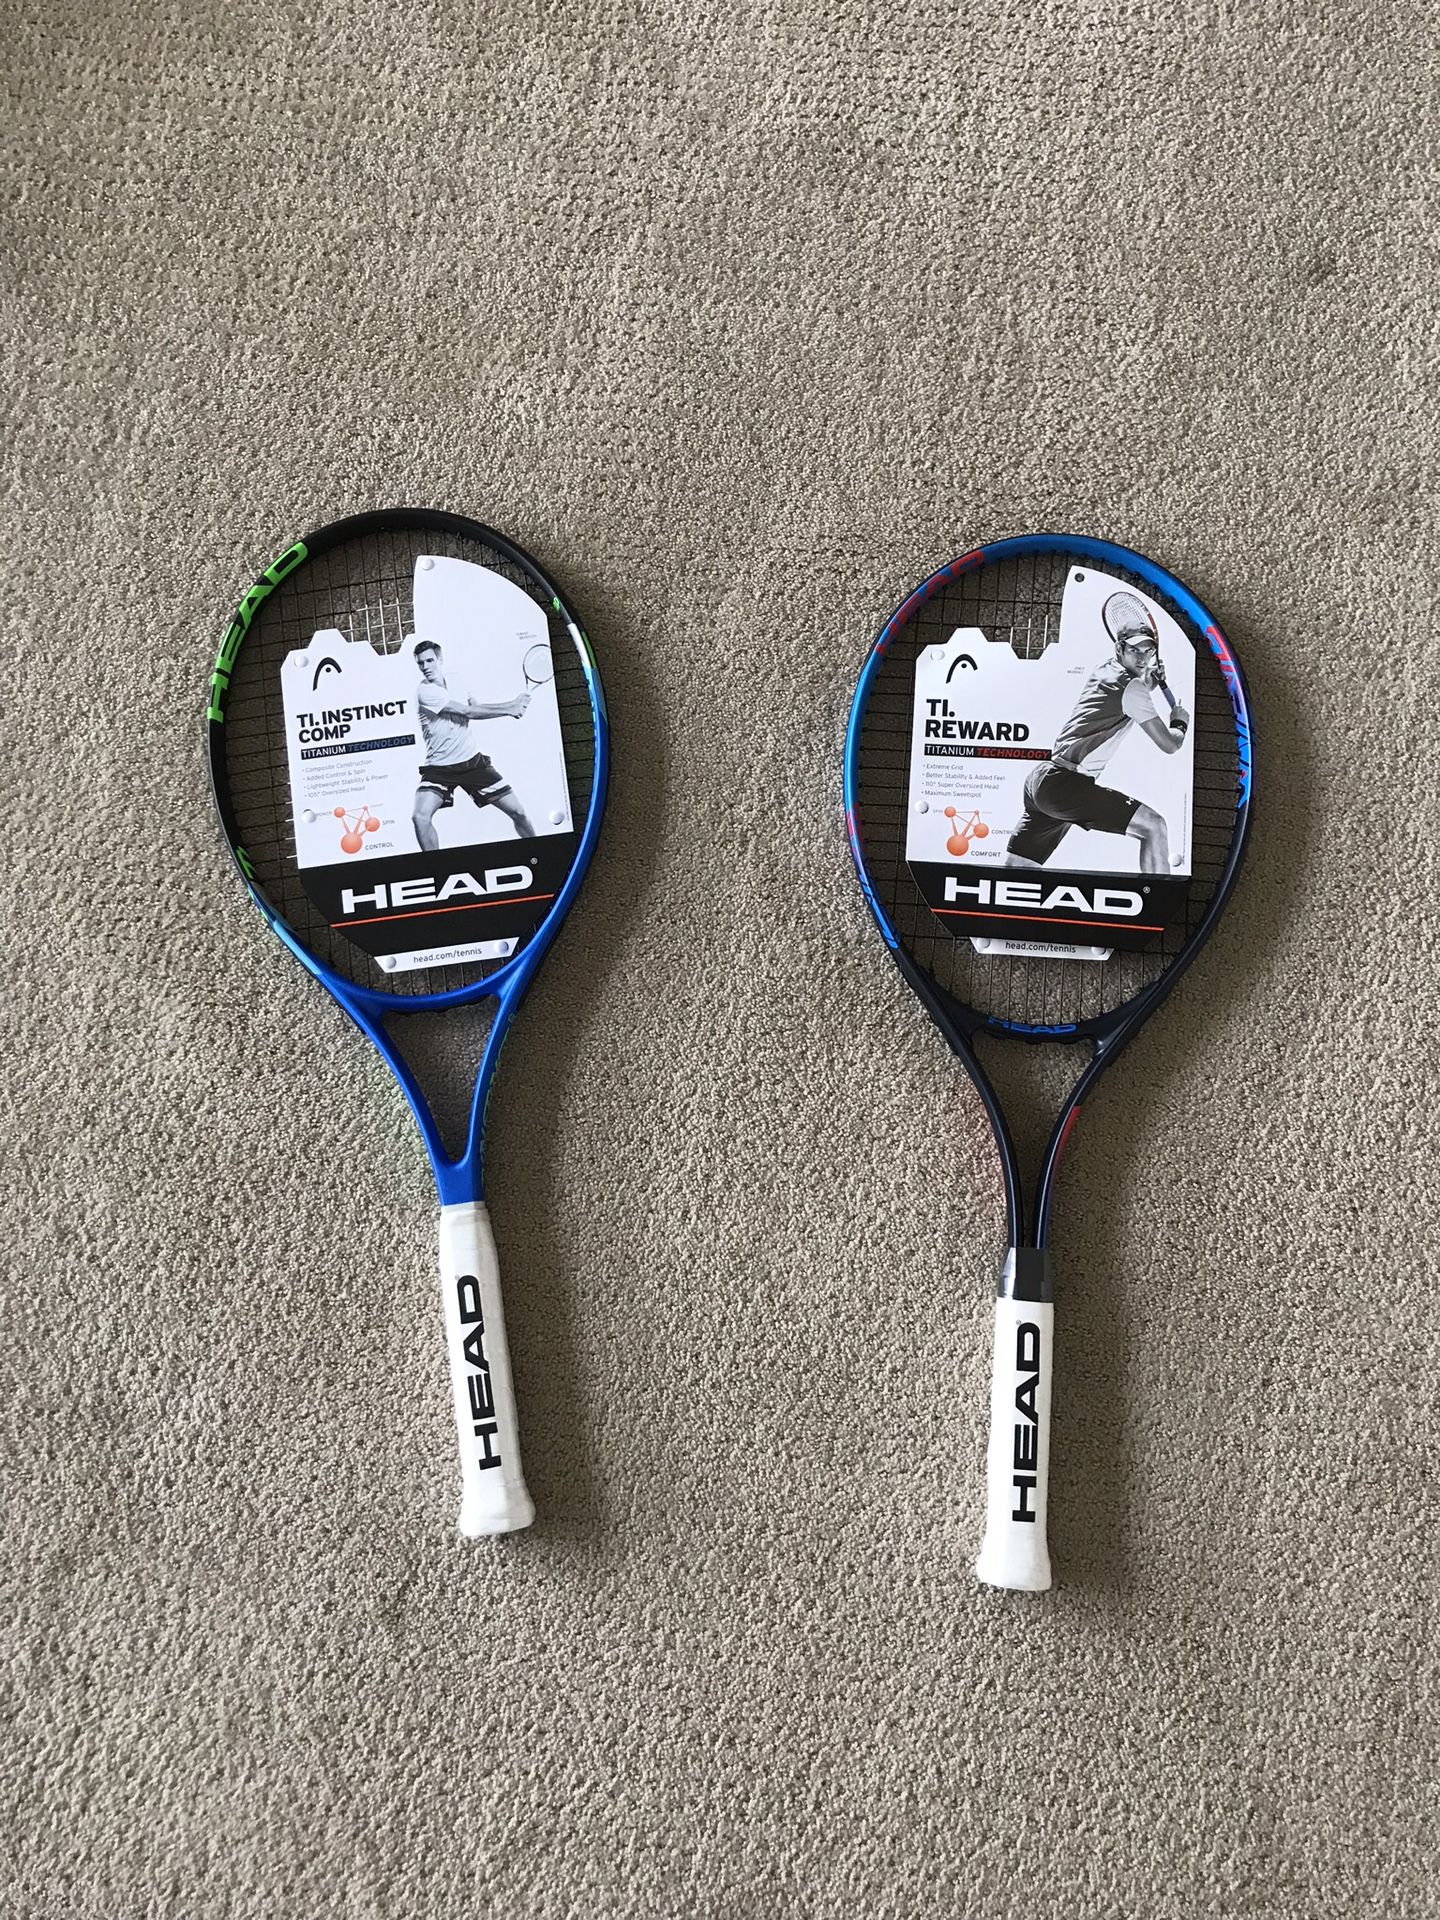 Bran new tennis rackets never used